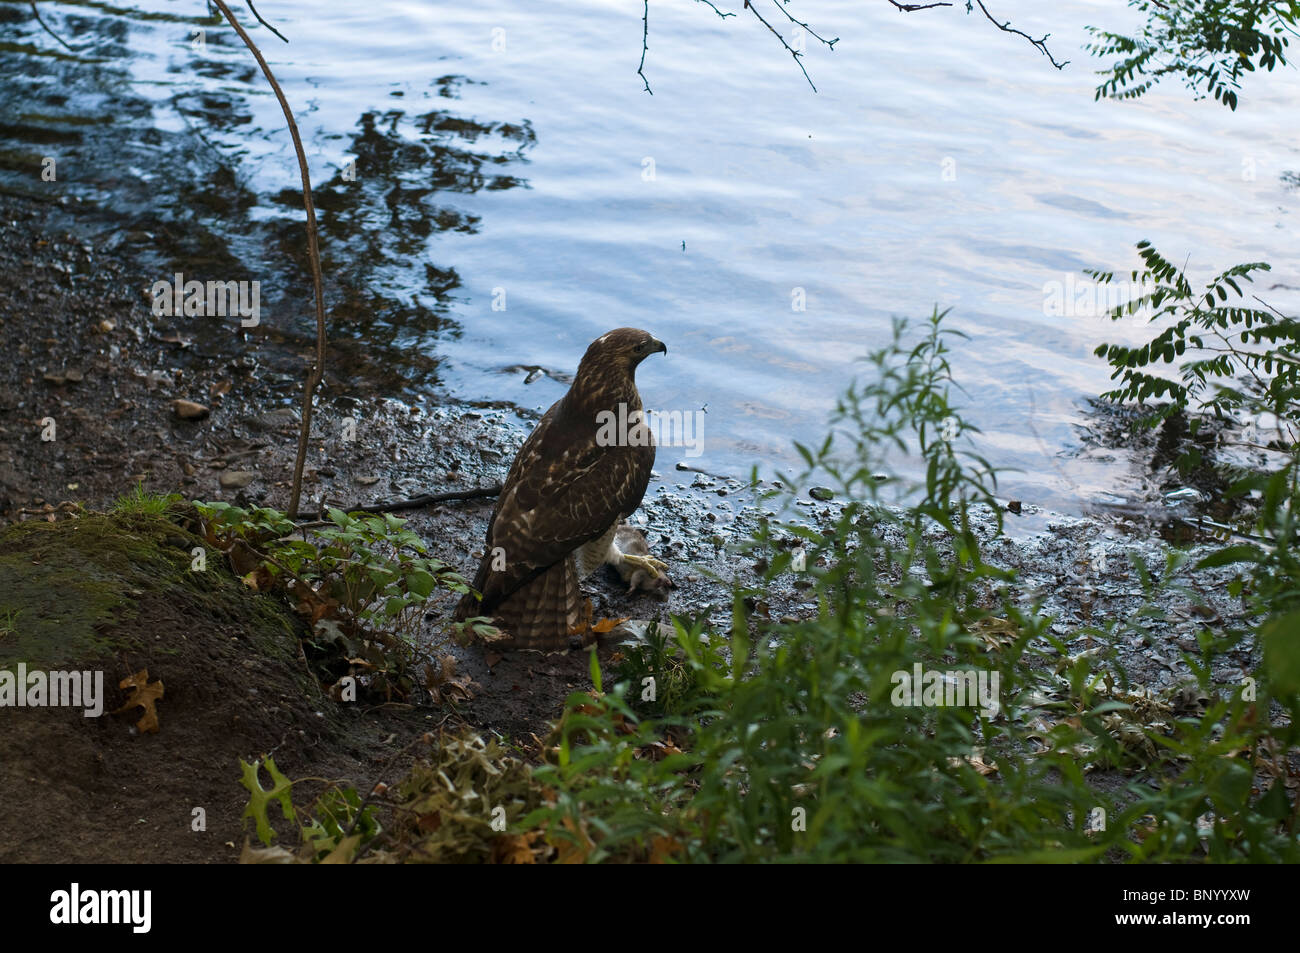 A hawk holds its prey next to the muddy river in Boston Massachusetts. Stock Photo